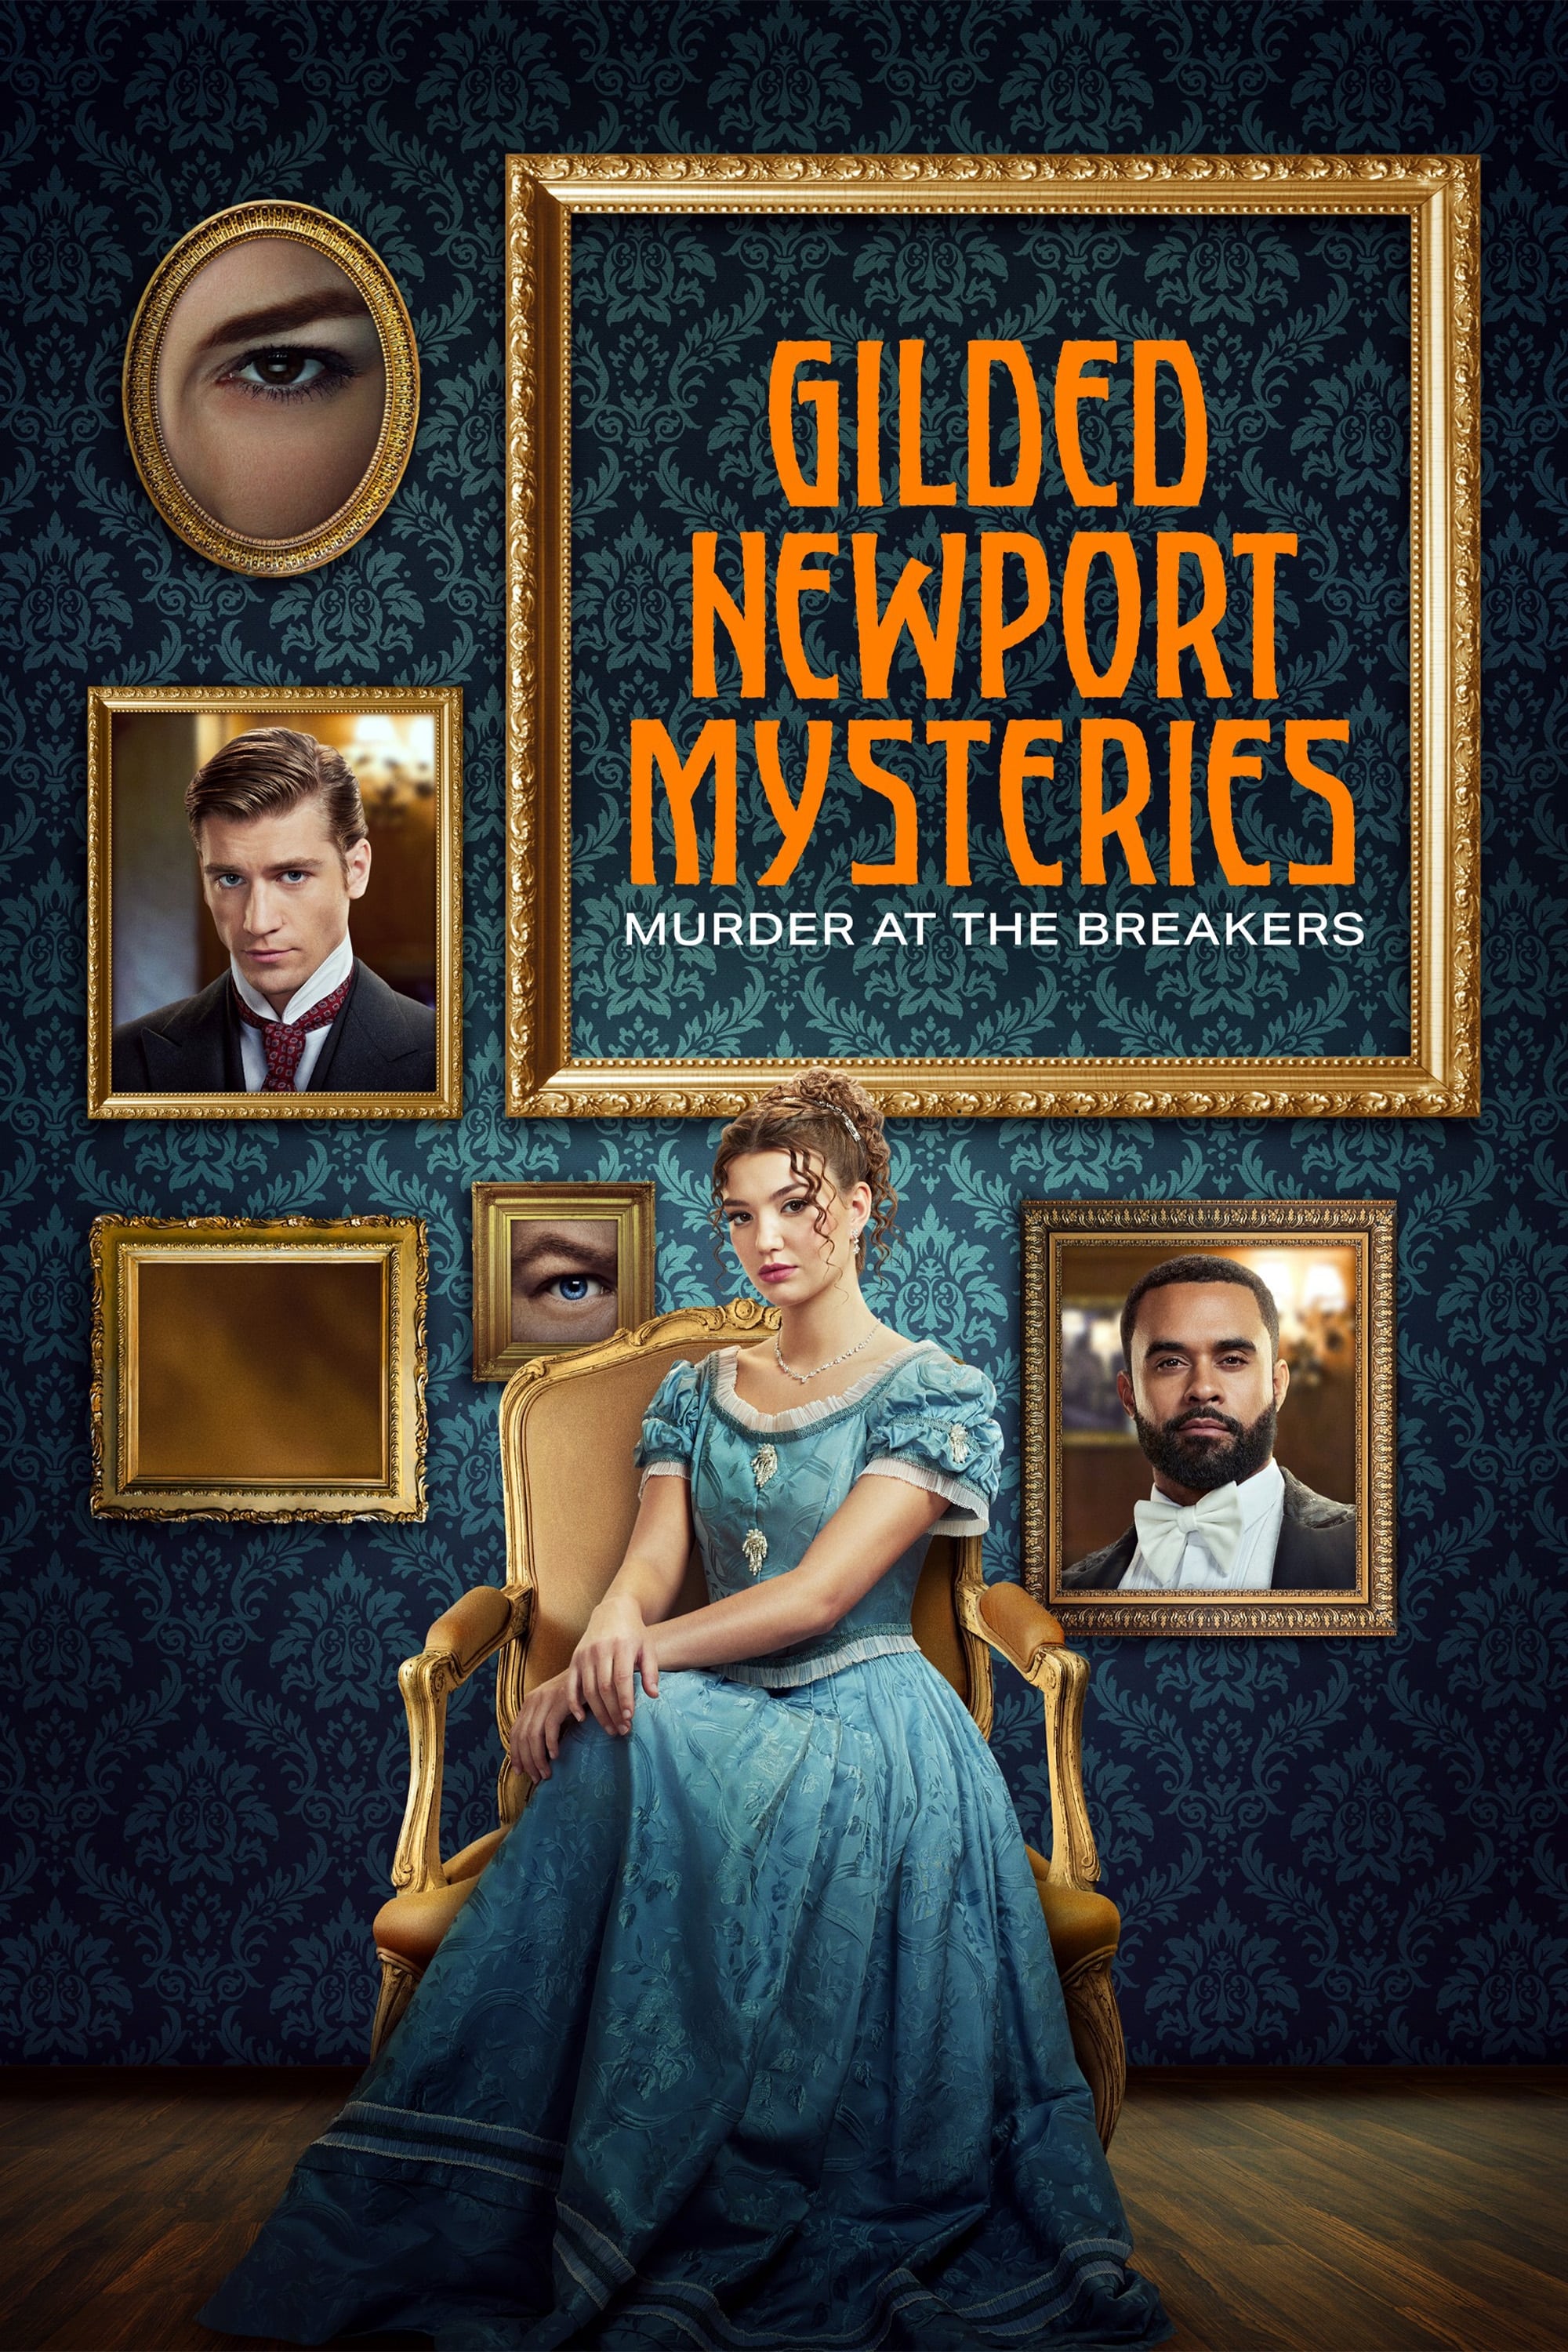 Gilded Newport Mysteries: Murder at the Breakers film